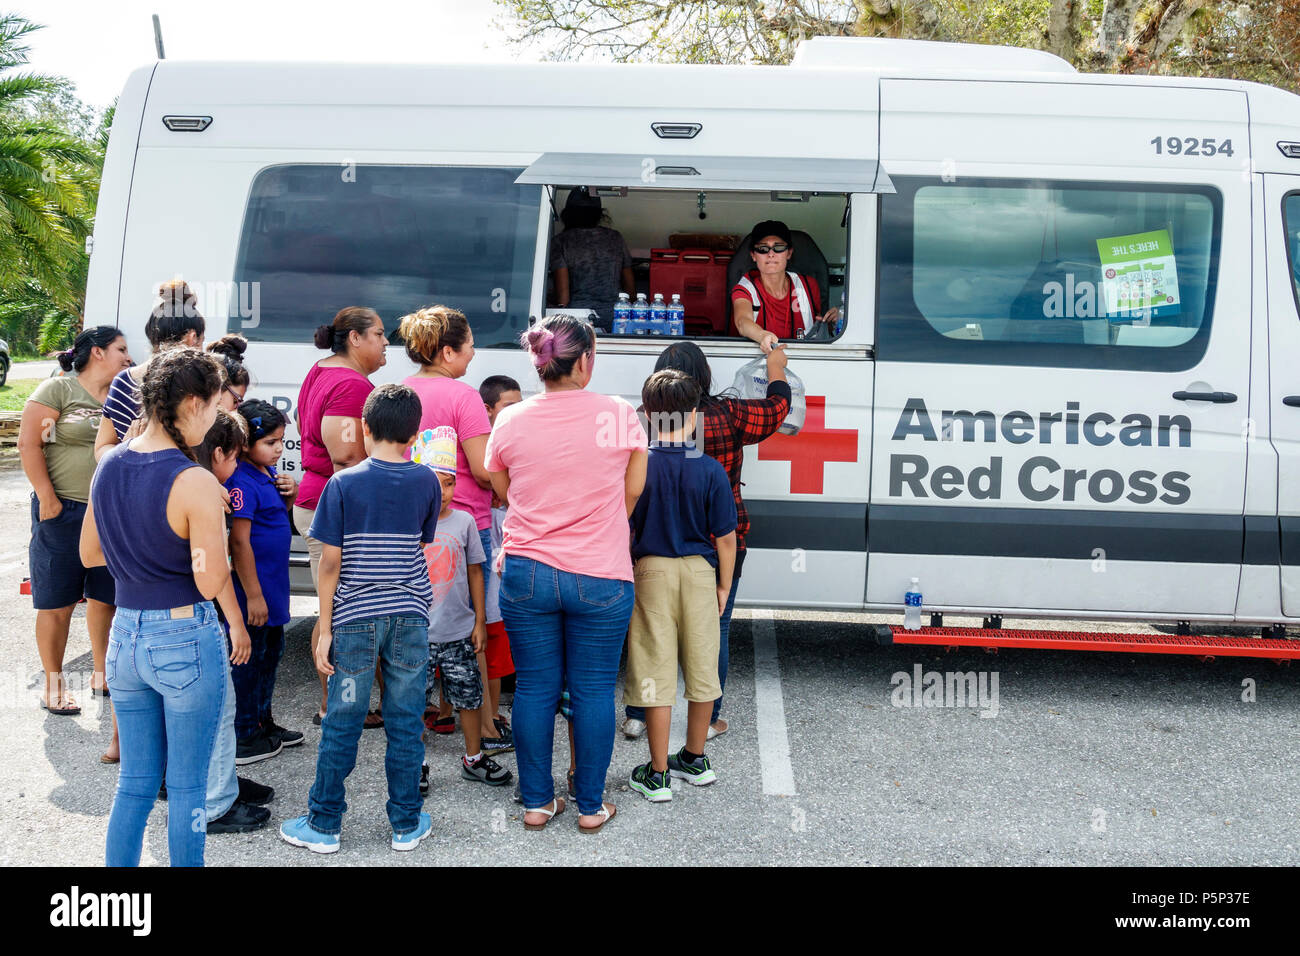 Florida LaBelle after Hurricane Irma assistance disaster recovery,Red Cross Disaster Relief helping food van free meals,Hispanic families kids residen Stock Photo